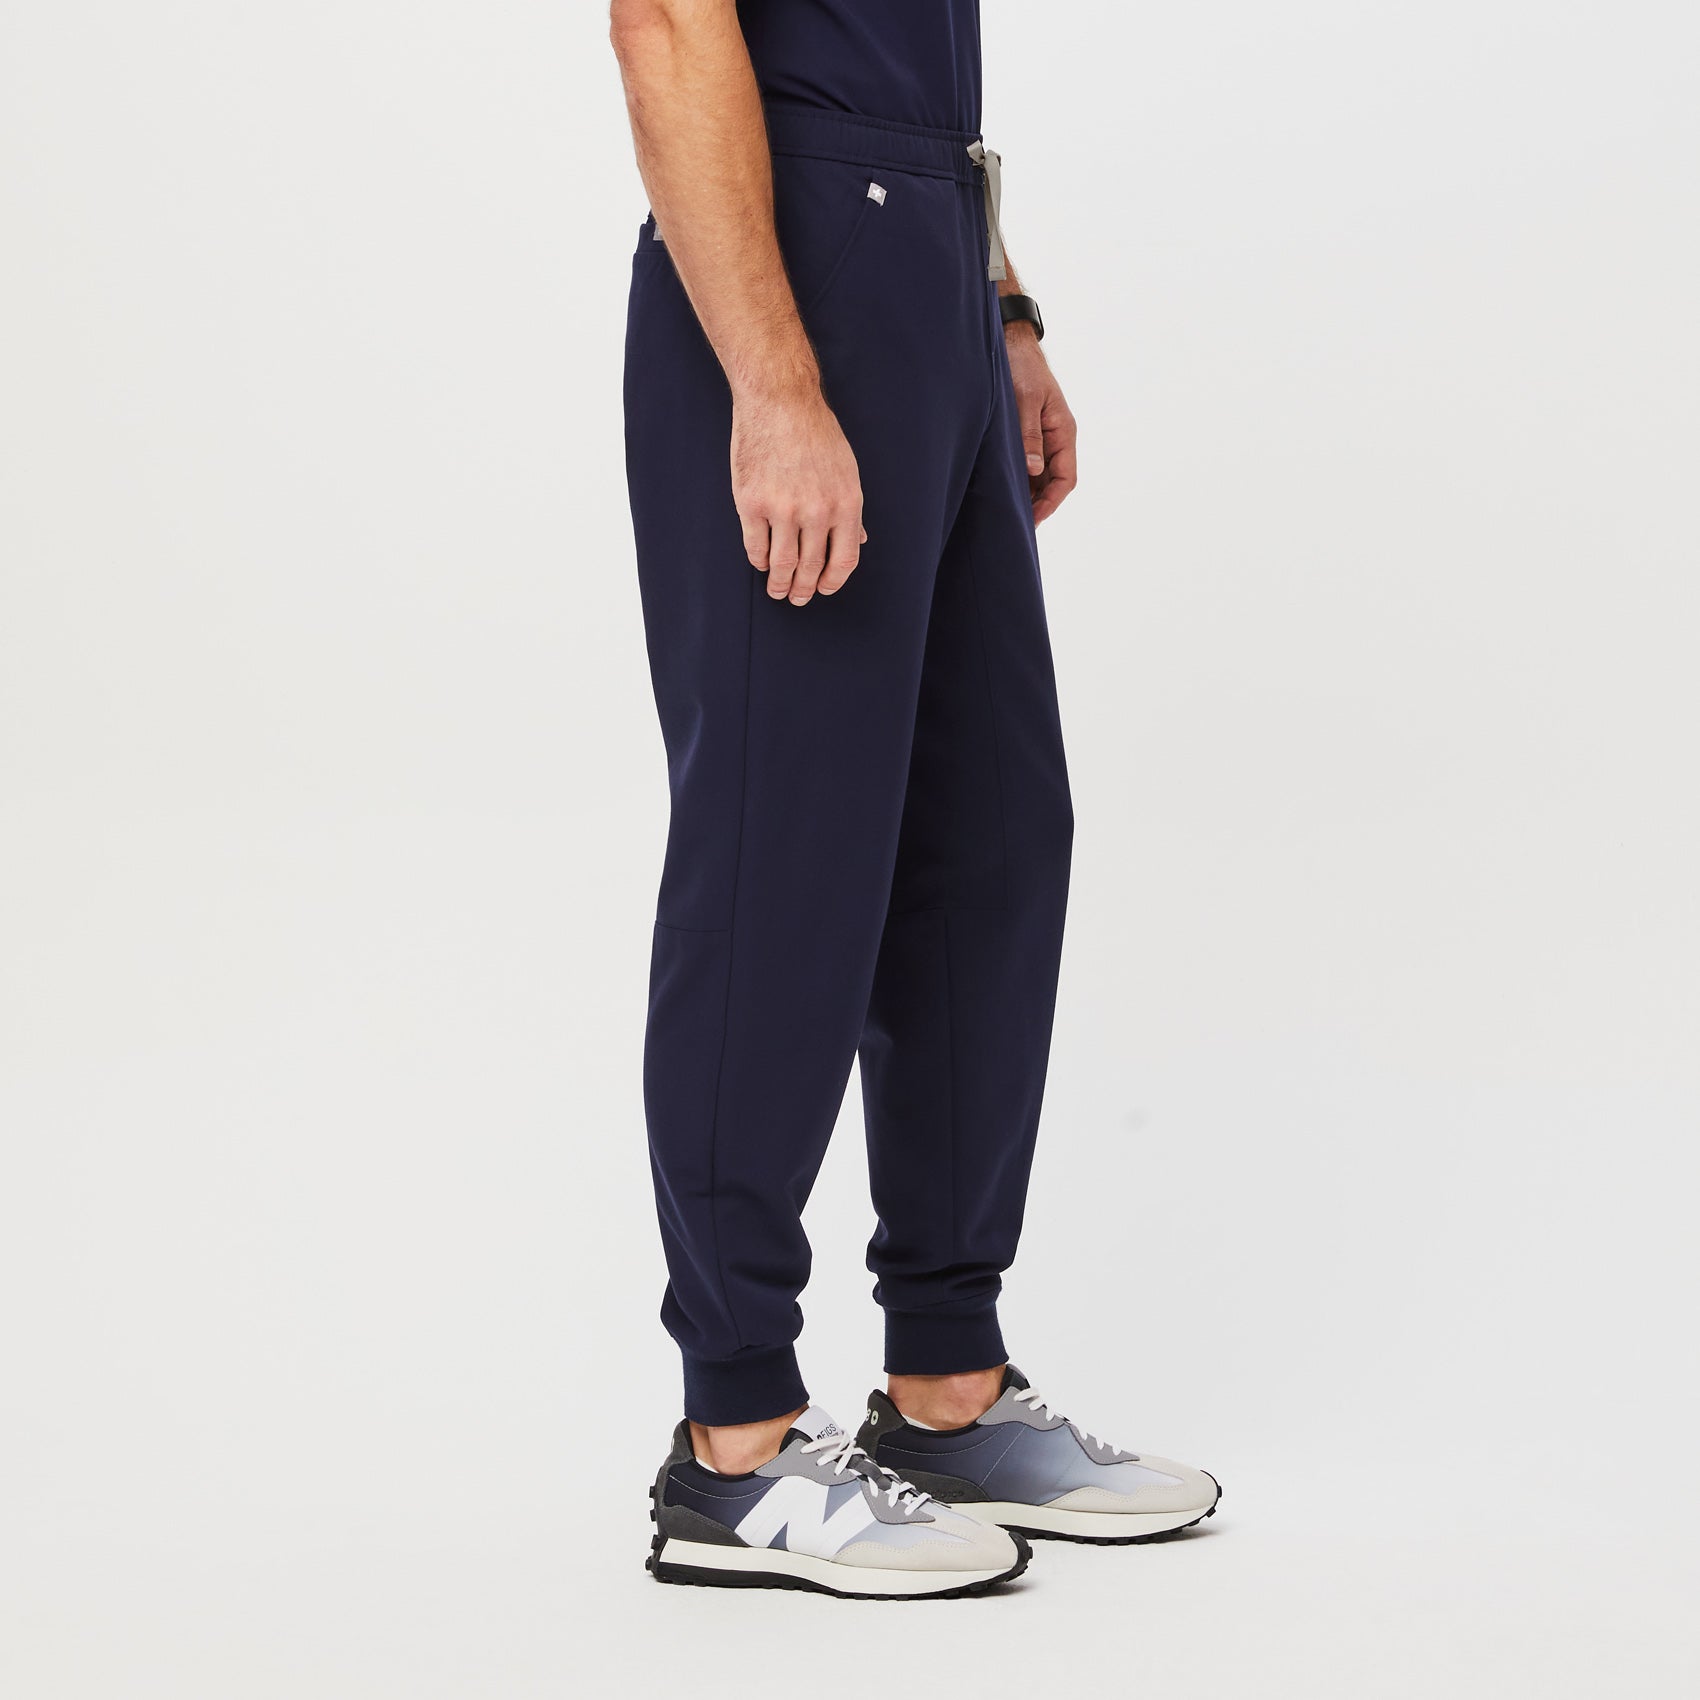 FIGS Tansen Jogger Scrub Pants for Men - Navy Blue, M, Navy Blue, M : Buy  Online at Best Price in KSA - Souq is now : Fashion